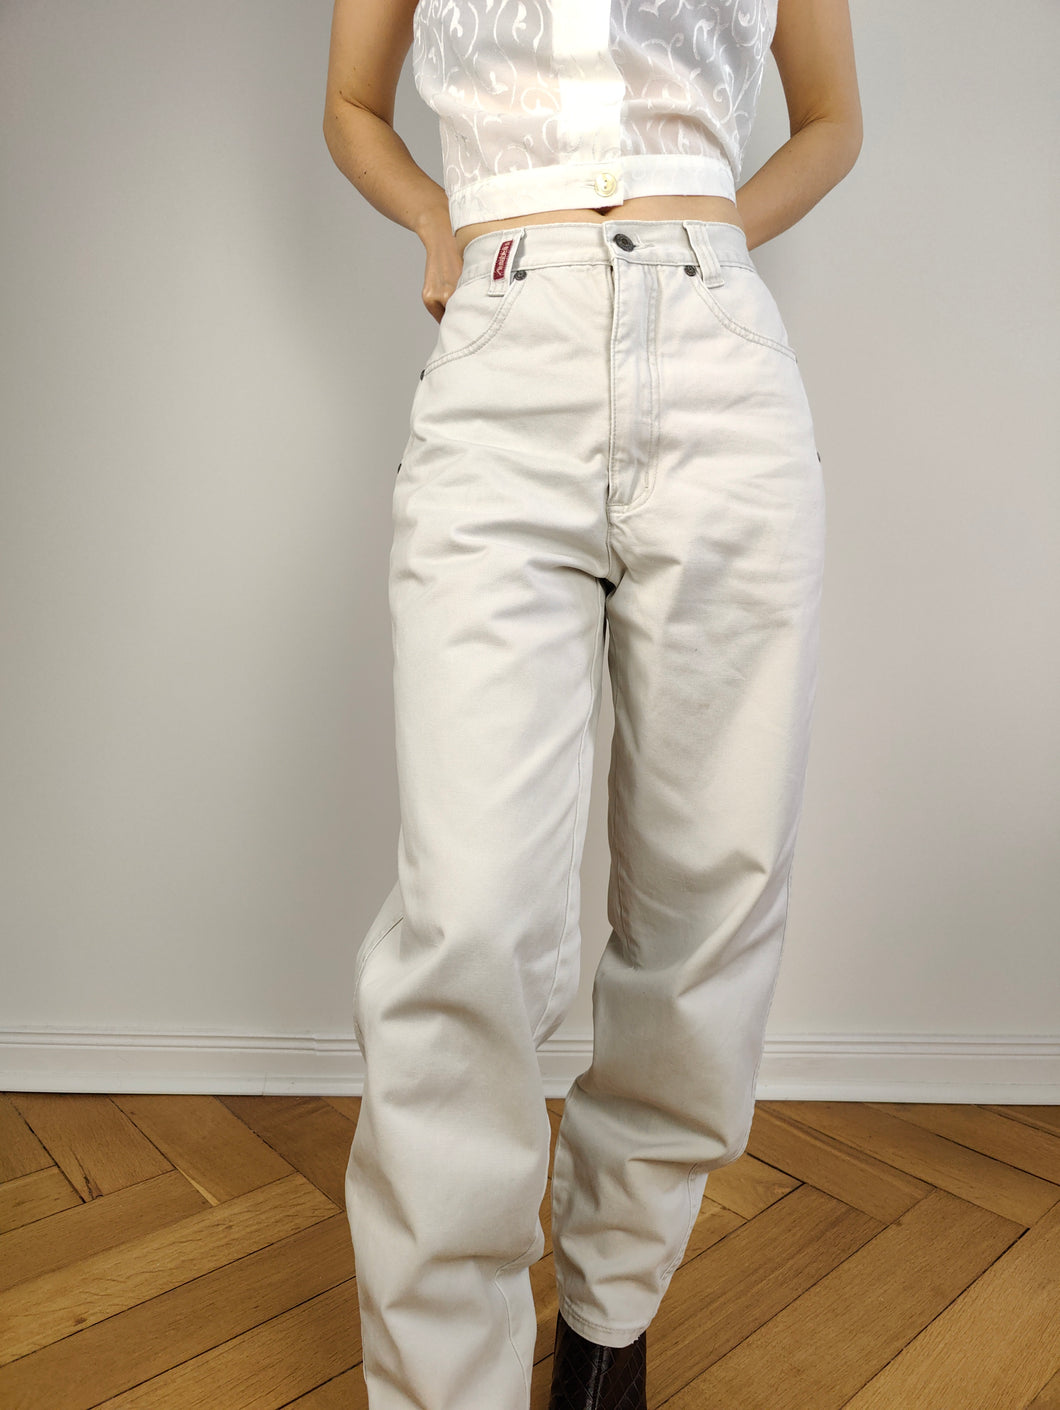 The White Grey Cotton Mom Trousers | Vintage Janet by Annabelle high waist mom jeans relaxed fit pants 30/30 M